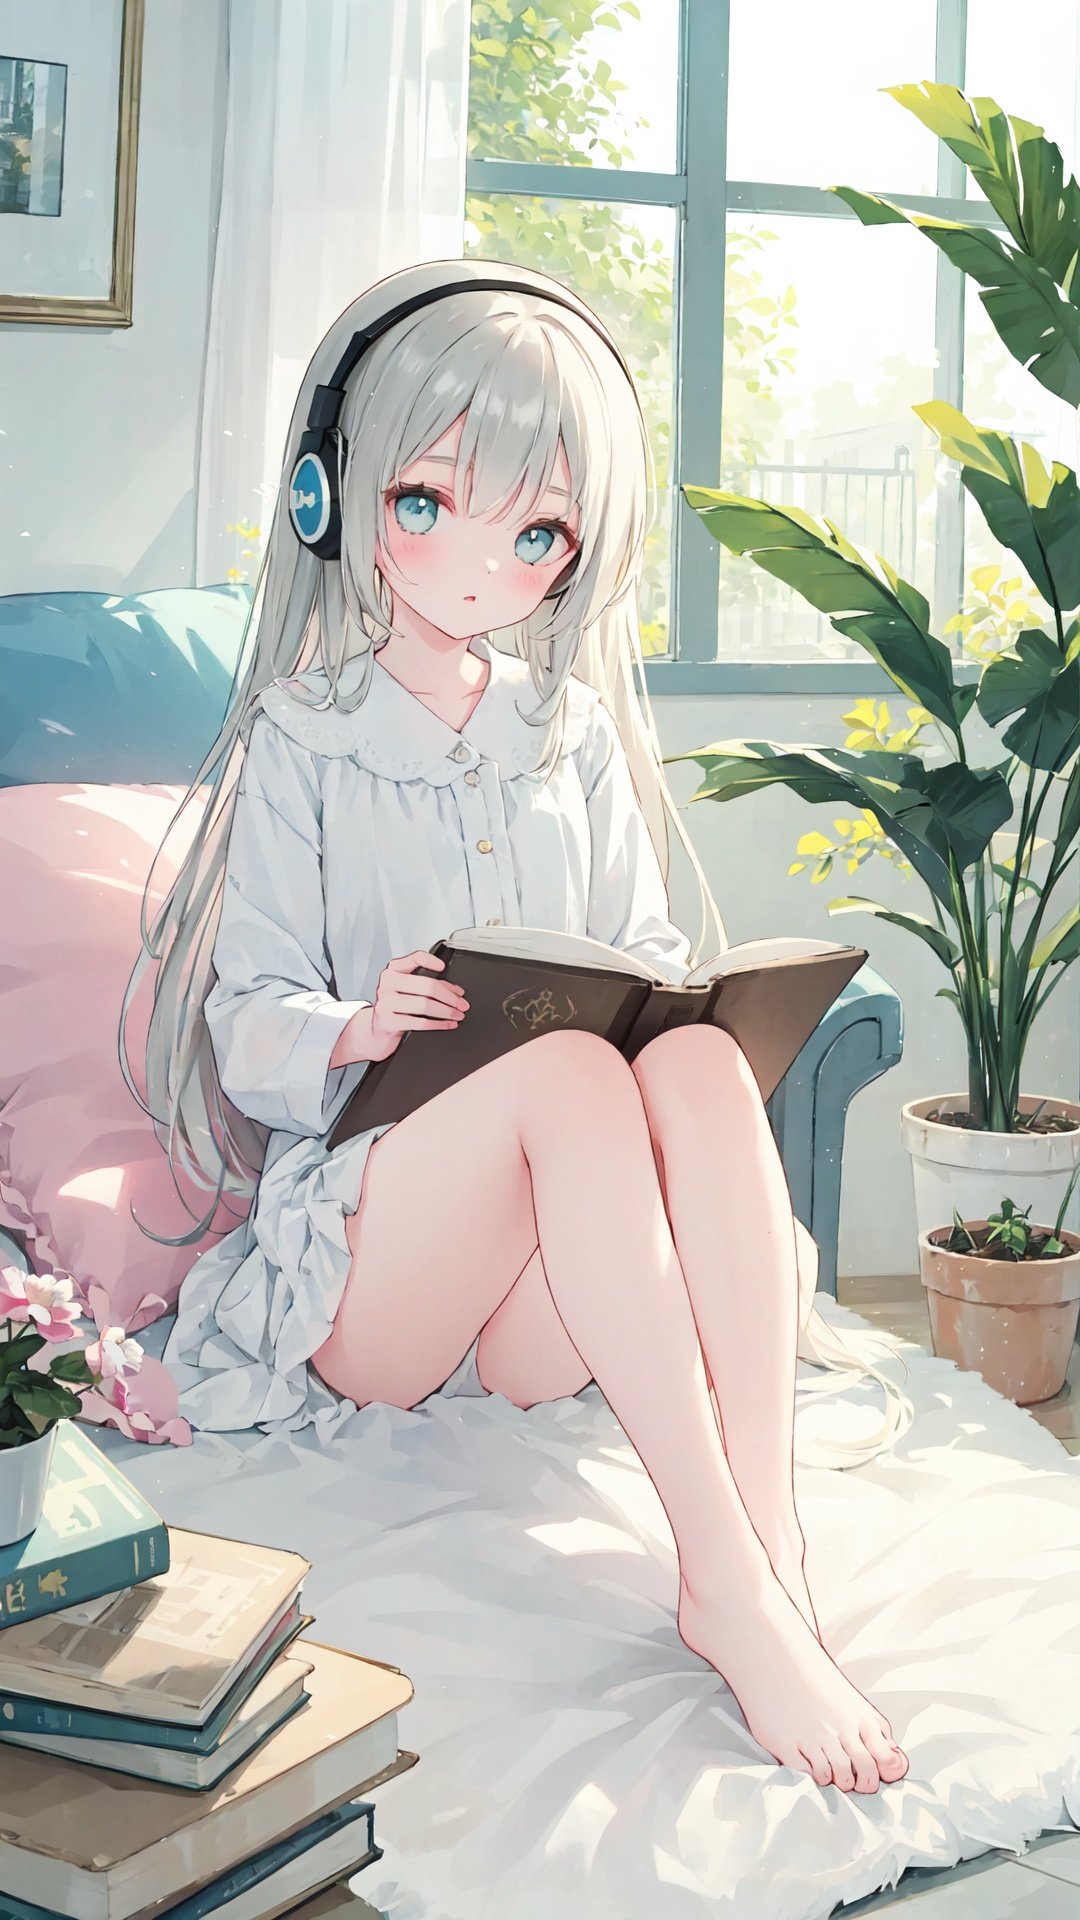 extremely delicate and beautiful, depth of field, amazing, masterpiece, growth, visual impact, ultra-detailed, 1girl, long_hair,Modernist style architecture, window, book, pillow, barefoot, solo, plant, very_long_hair, indoors, potted_plant, headphones, cup, gorgeous, fantasism, nature, refined rendering, original, contour deepening, high-key and low-variance brightness scale, soft light, light and dark interlaced